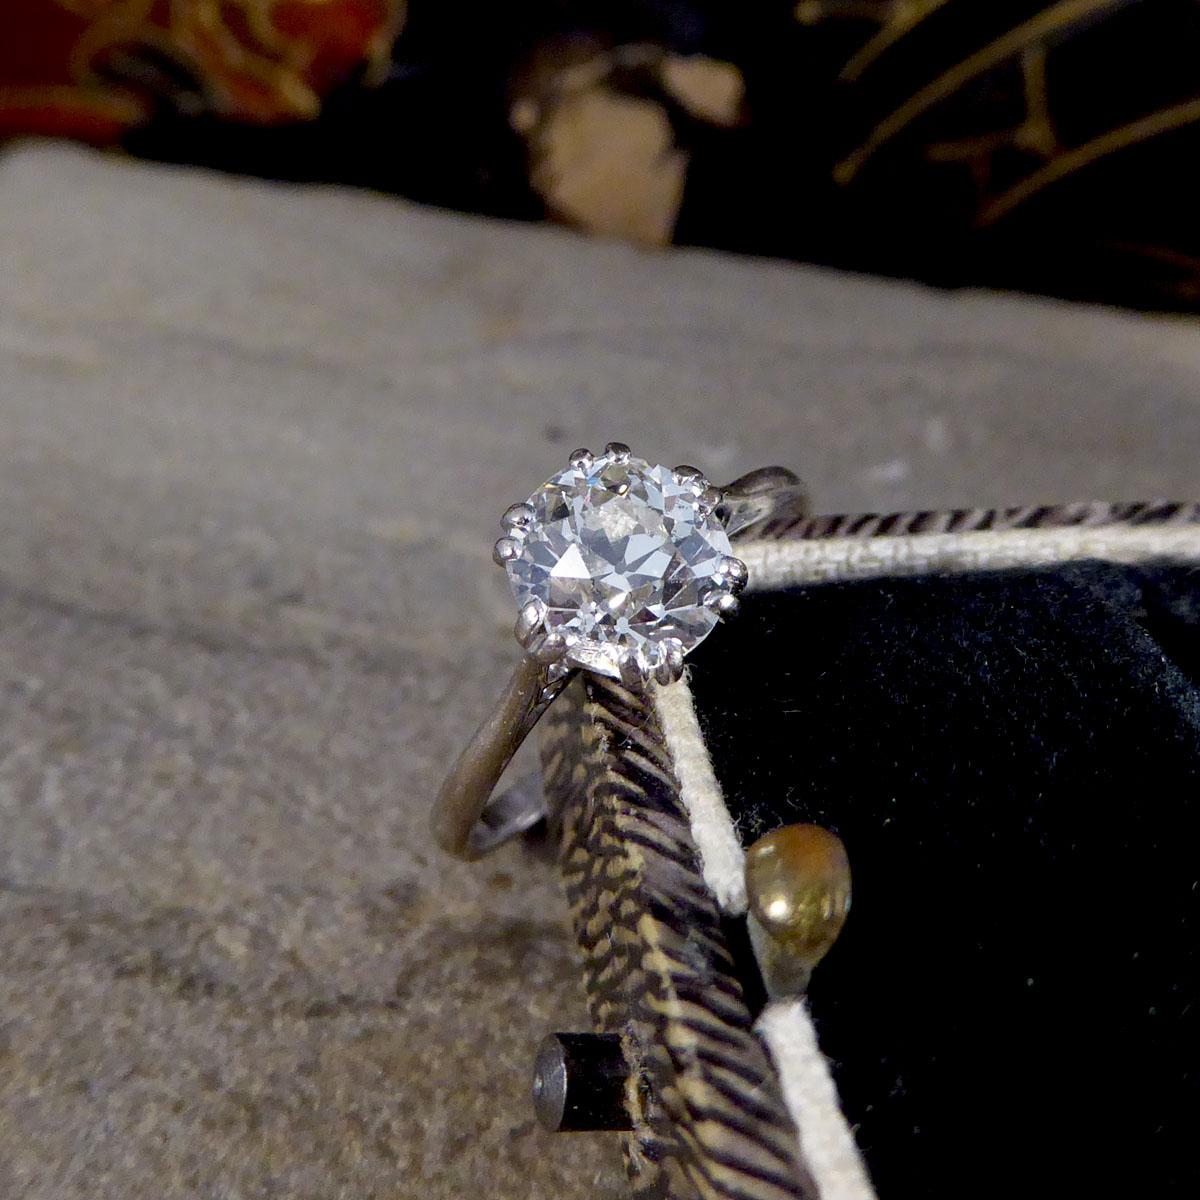 Edwardian 1.20ct Old Cushion Cut Diamond Solitaire Engagement Ring in 18ct White 4